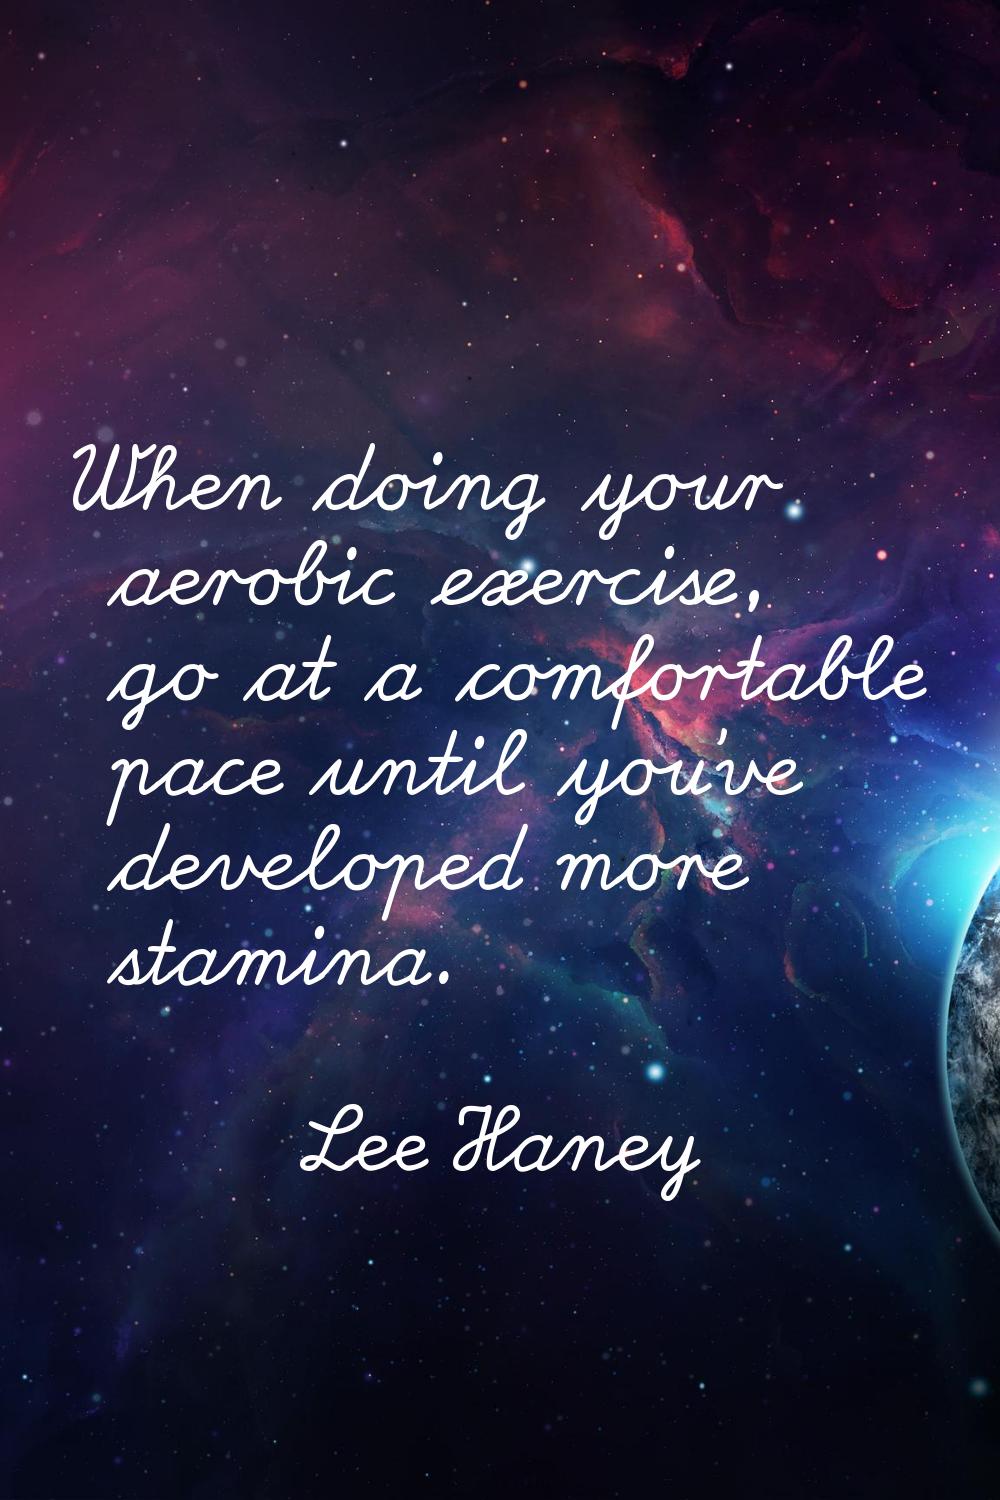 When doing your aerobic exercise, go at a comfortable pace until you've developed more stamina.